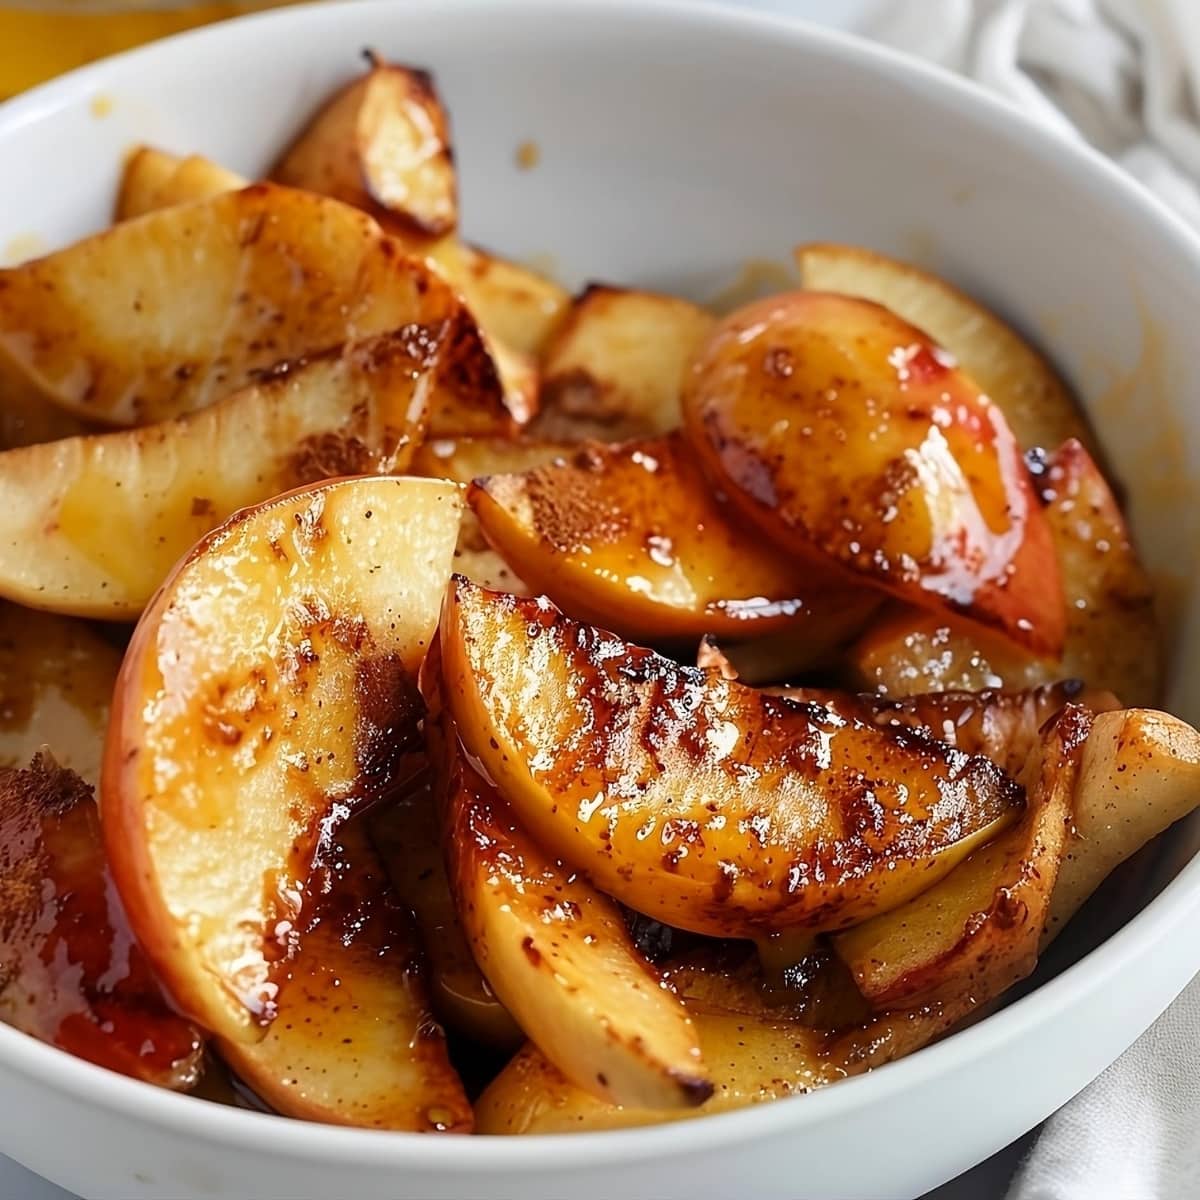 Baked apple slices with cinnamon, sugar and butter served on a white bowl.